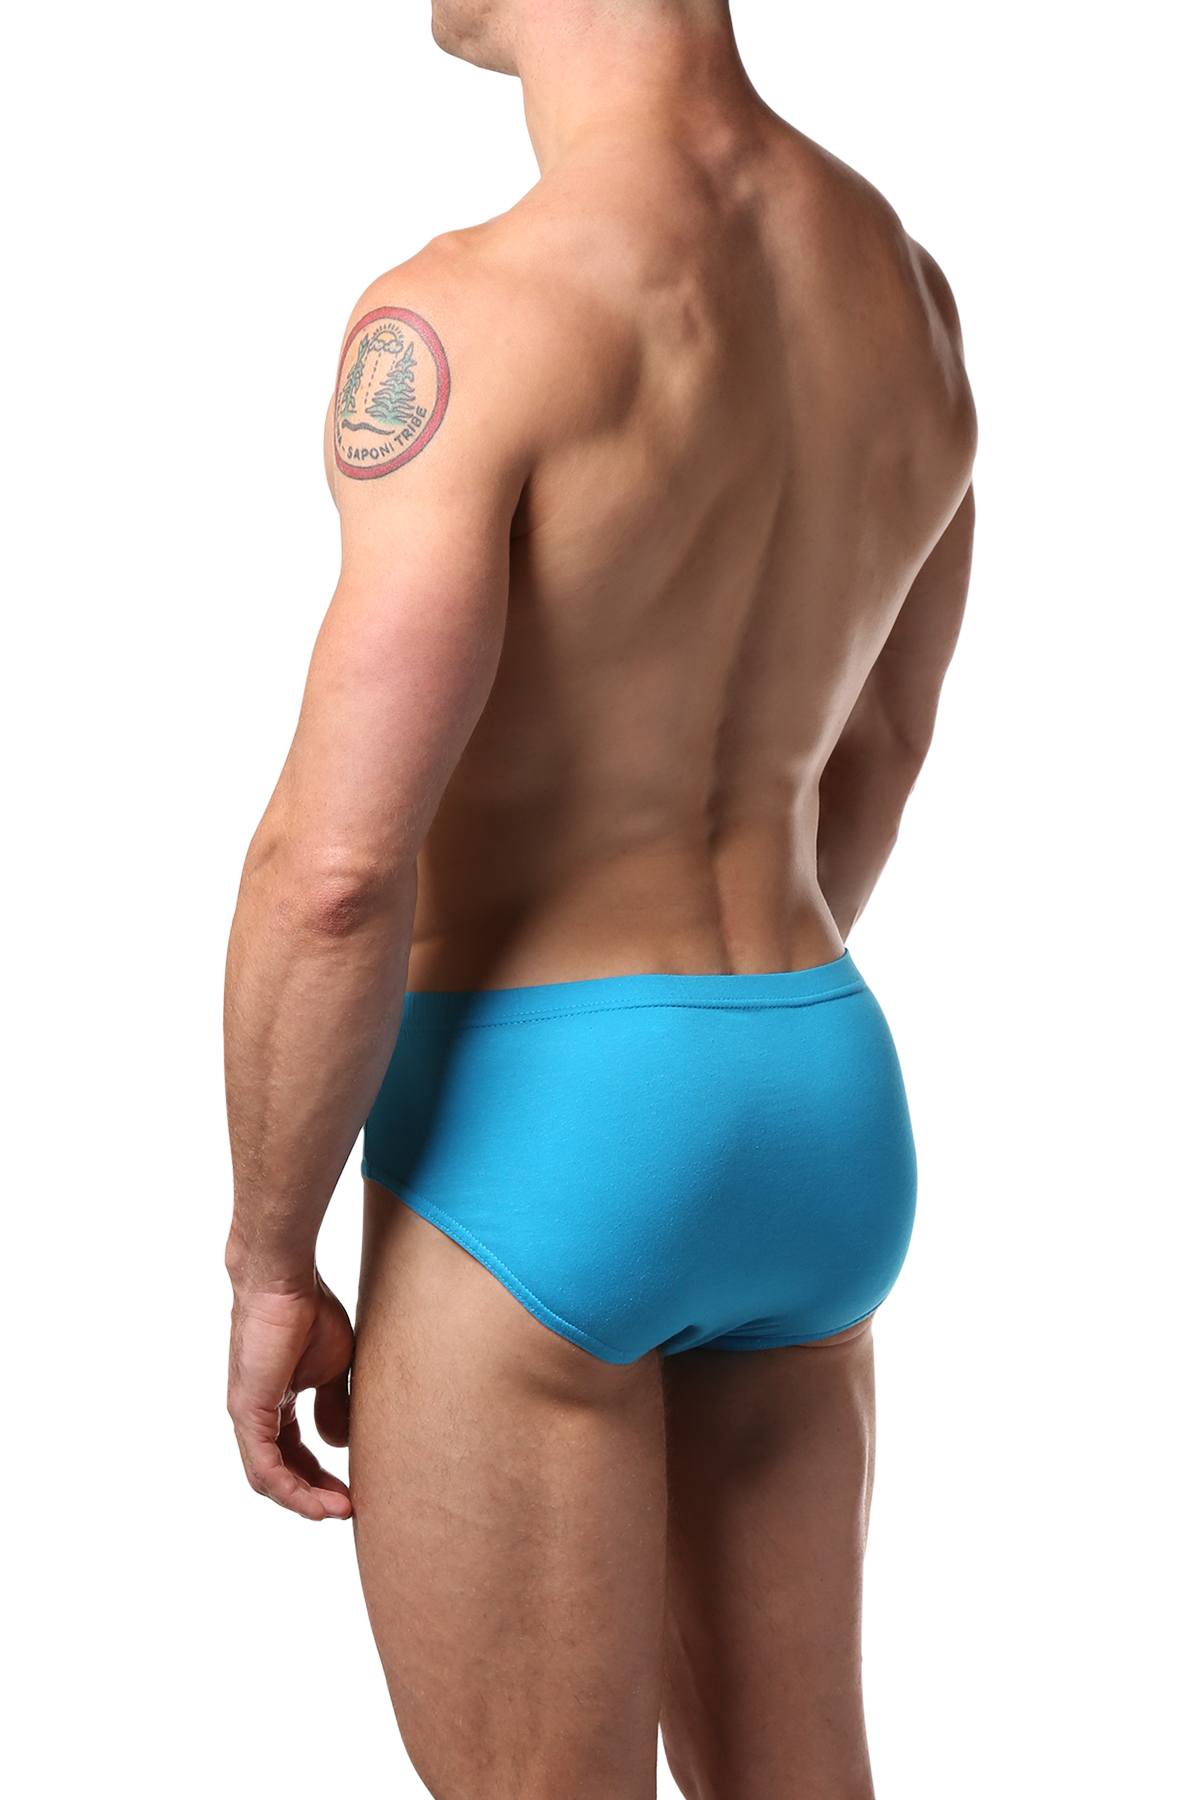 Papi Lime/Blue/Navy/Grey/Black Low-Rise Brief 5-Pack